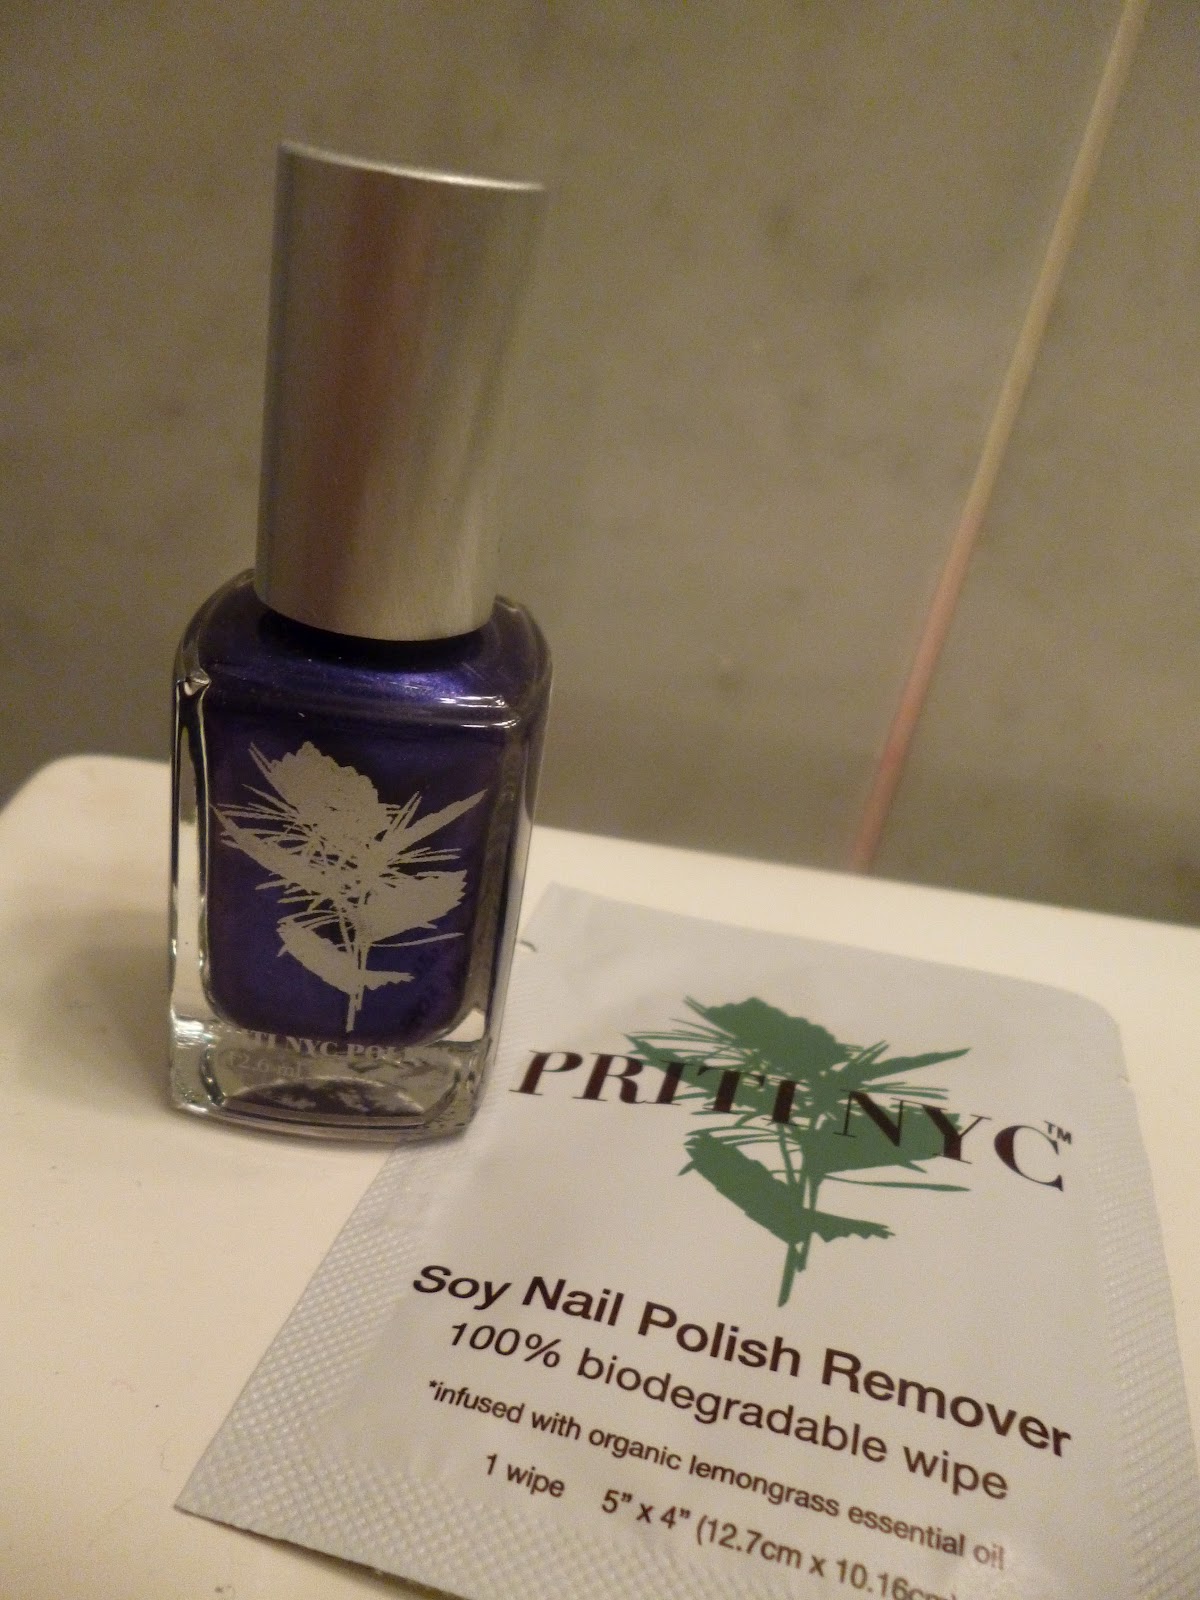 Priti NYC included a nail polish (this one is Chelsea Star a purple/blue